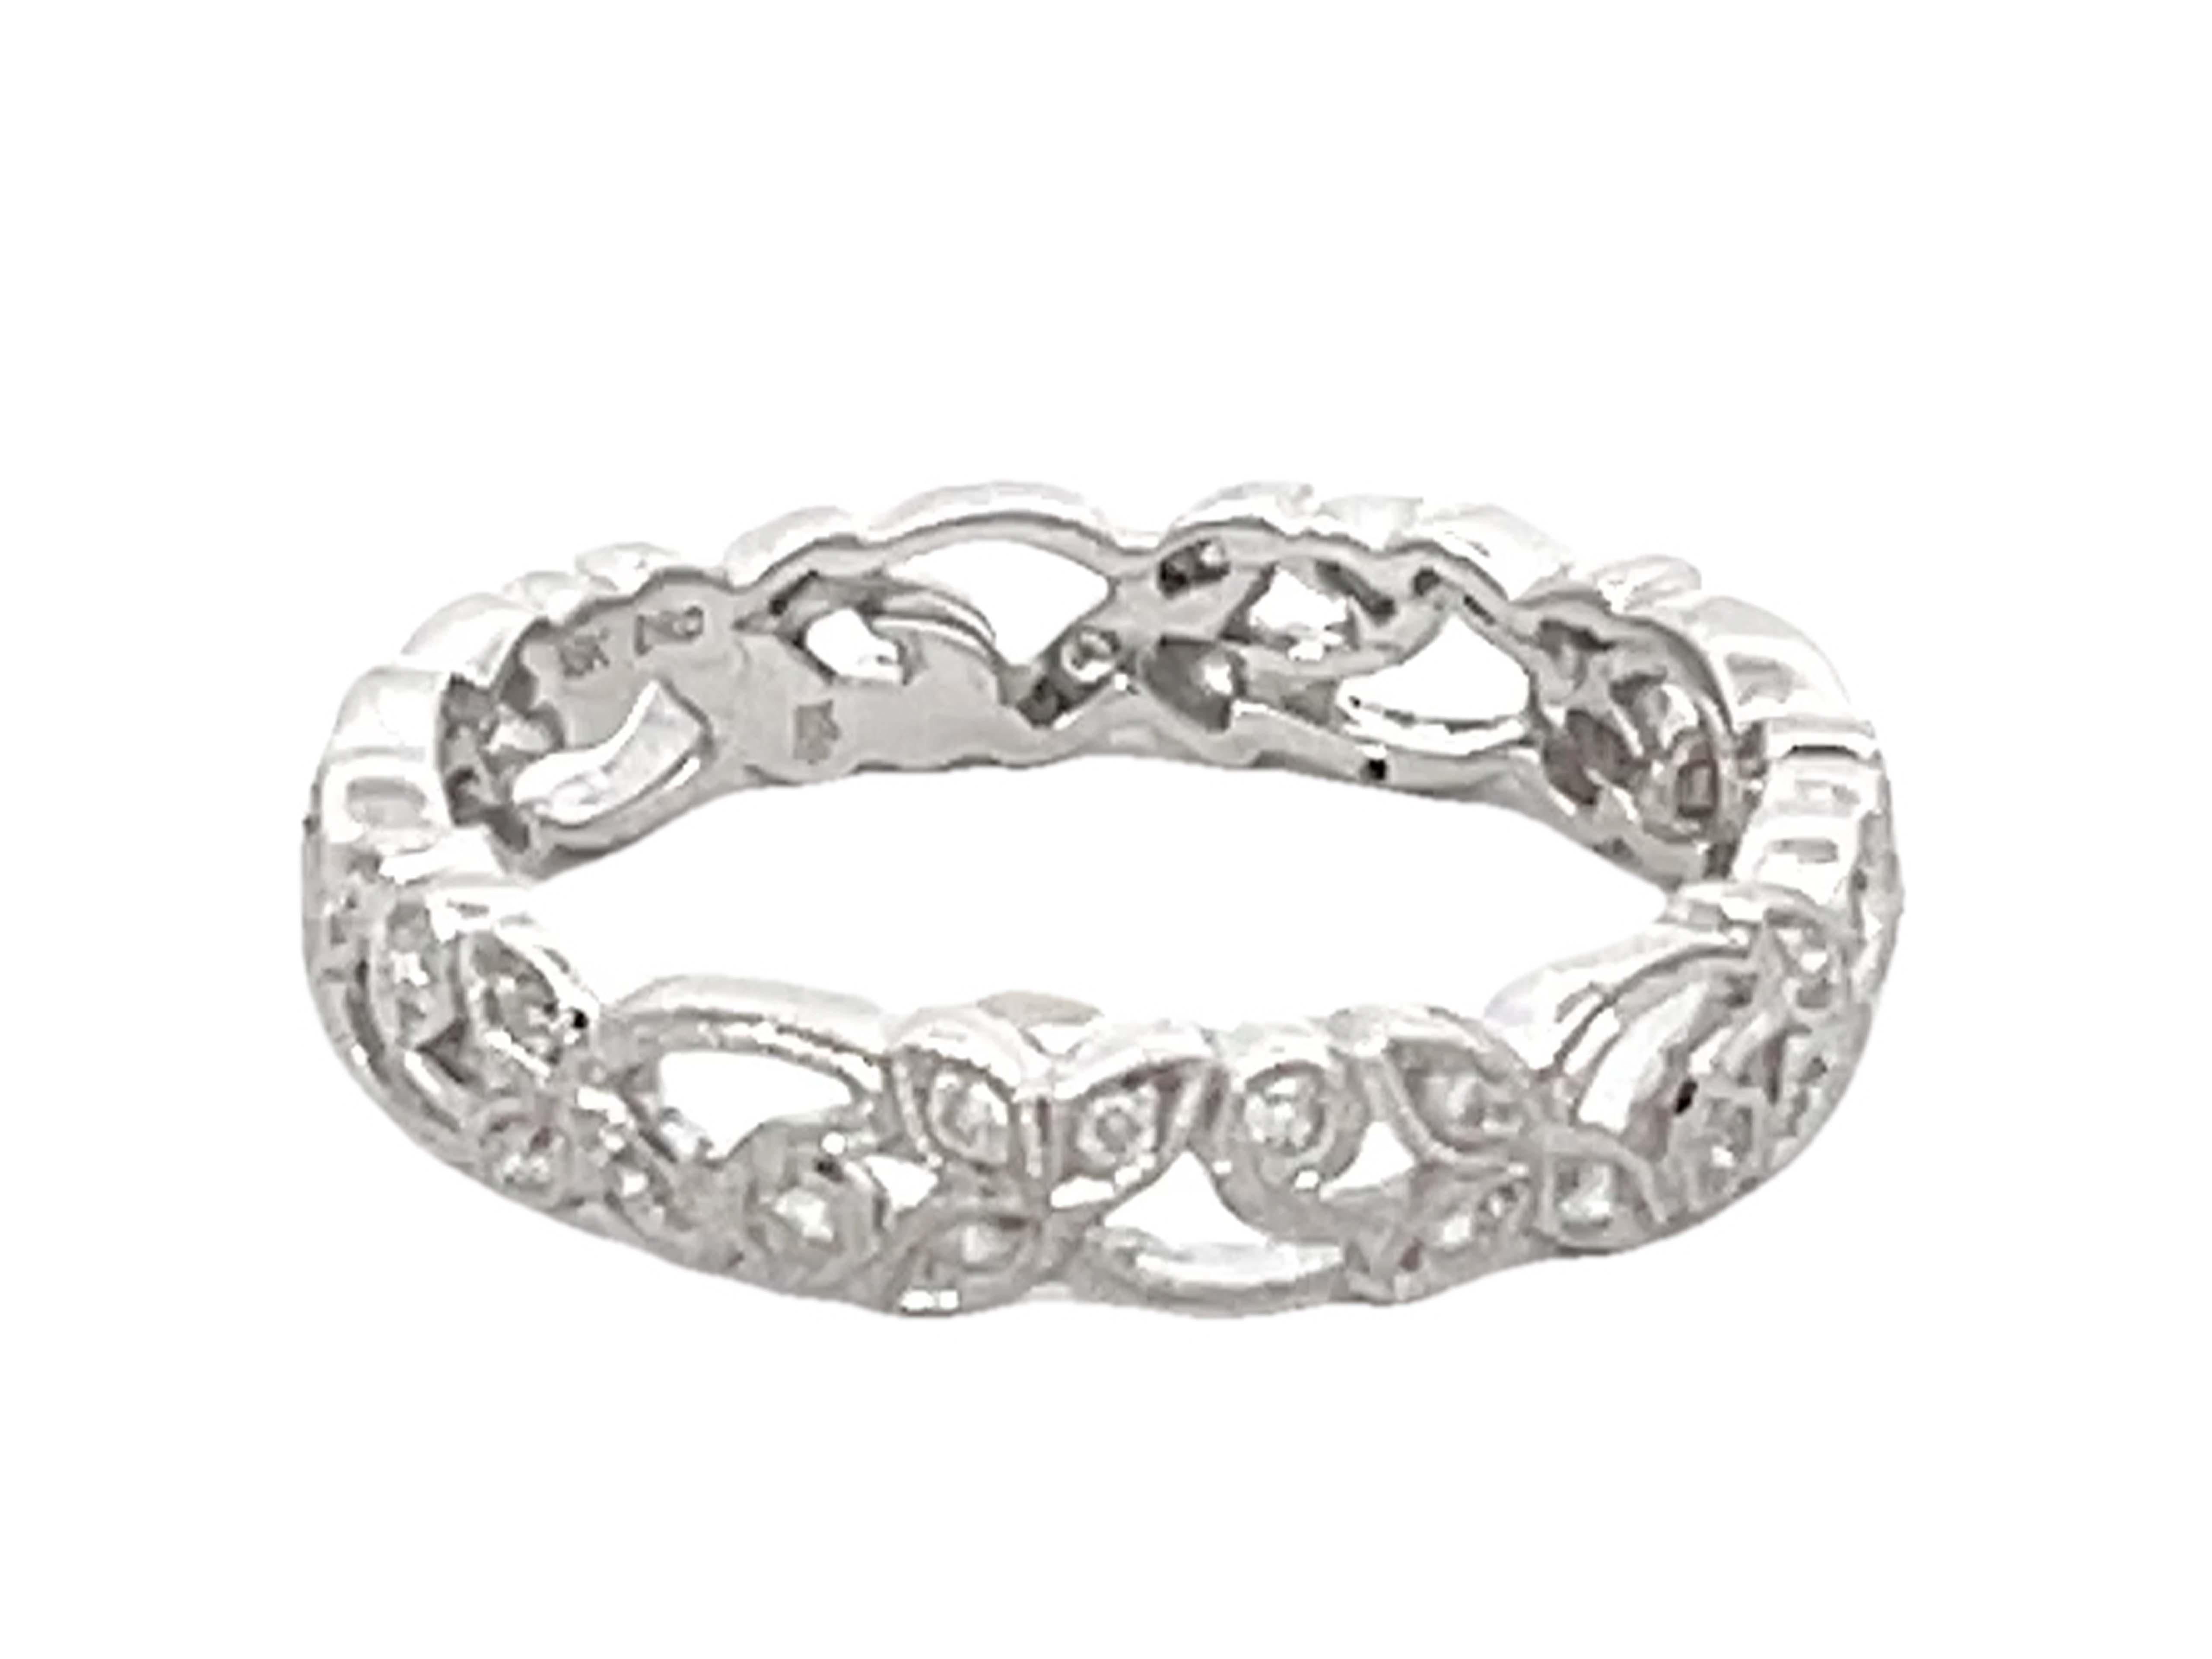 Brilliant Cut Beverley Kay Floral Eternity Band Ring 18k White Gold For Sale